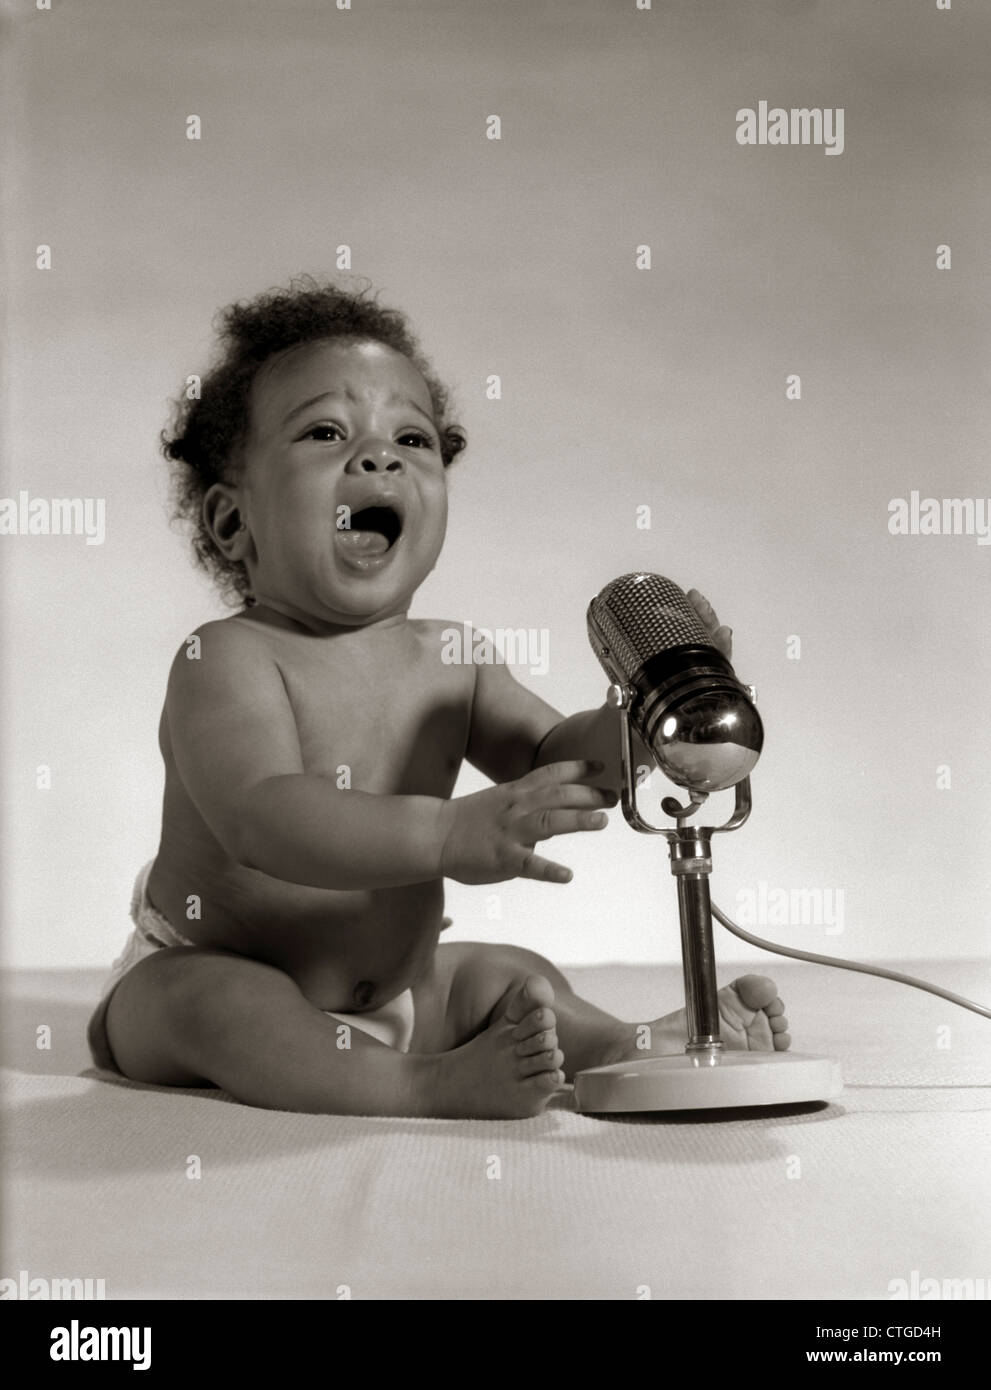 1960s AFRICAN-AMERICAN BABY SEATED IN FRONT OF OLD FASHIONED MICROPHONE WITH MOUTH OPEN BROADCASTING RADIO Stock Photo